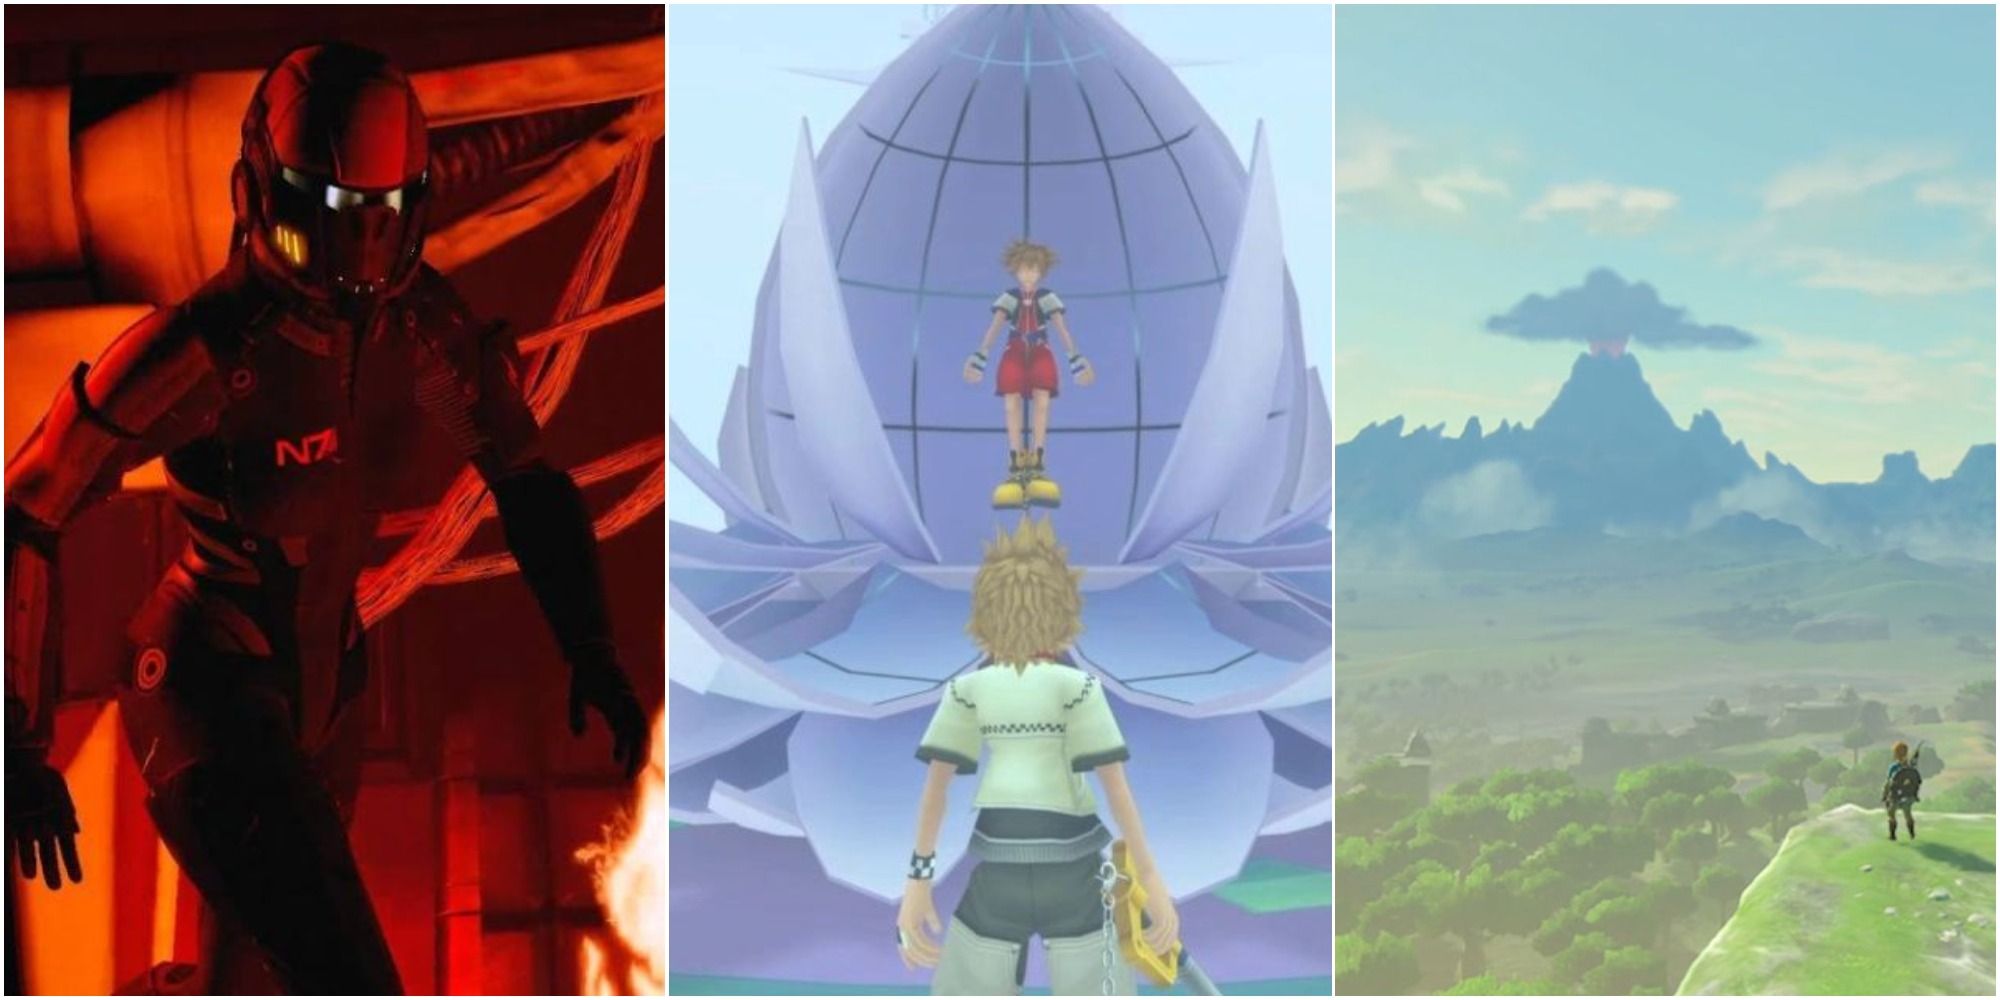 Shepard running in the burning Normandy, Roxas looking at Sora in a flower-like machine, and Link overlooking the landscape of Hyrule, left to right